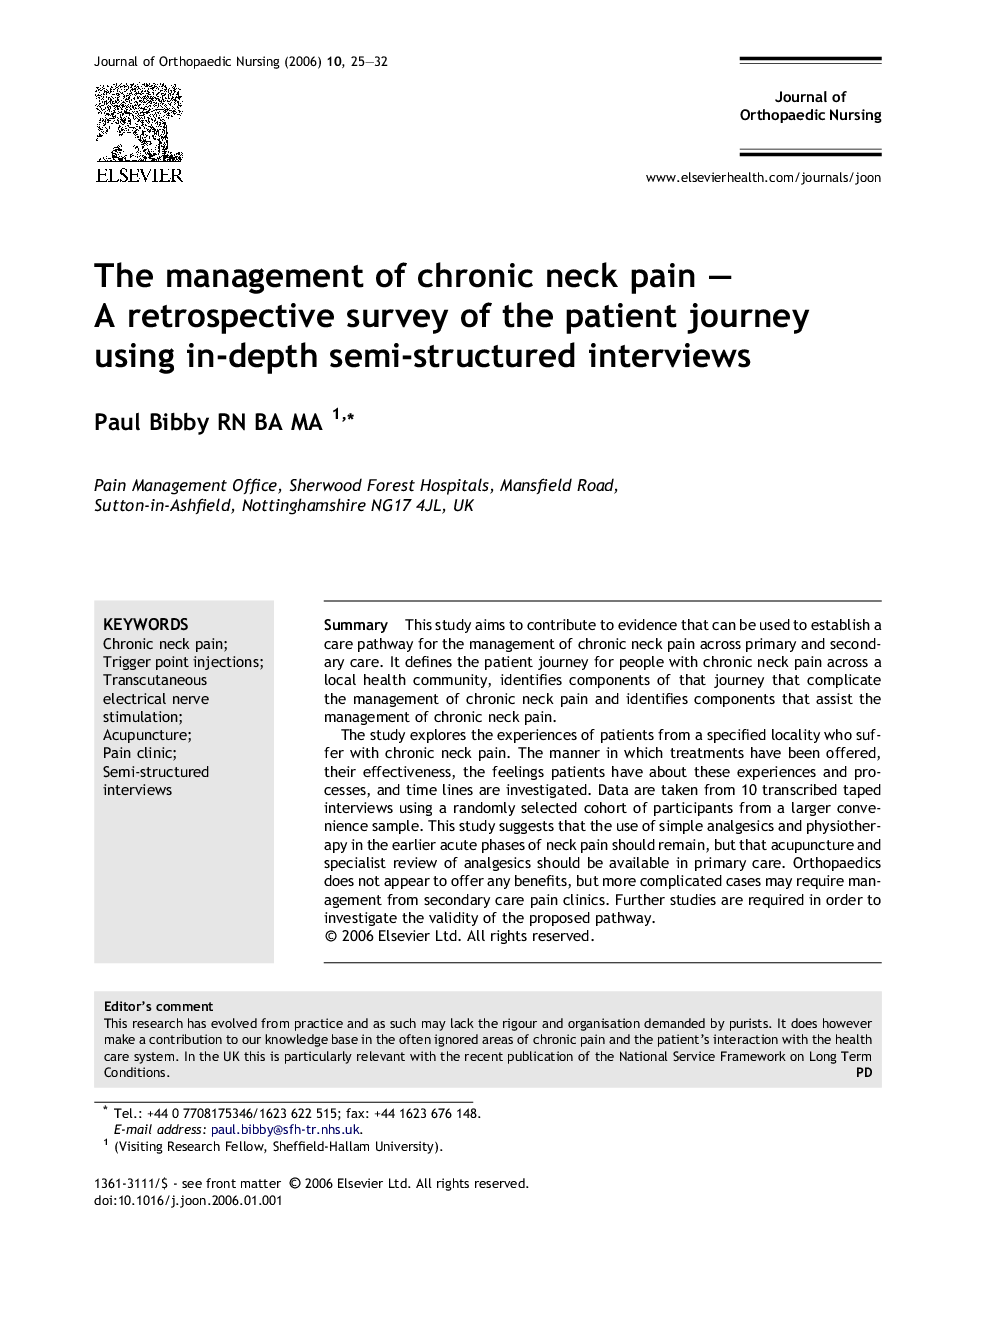 The management of chronic neck pain – A retrospective survey of the patient journey using in-depth semi-structured interviews